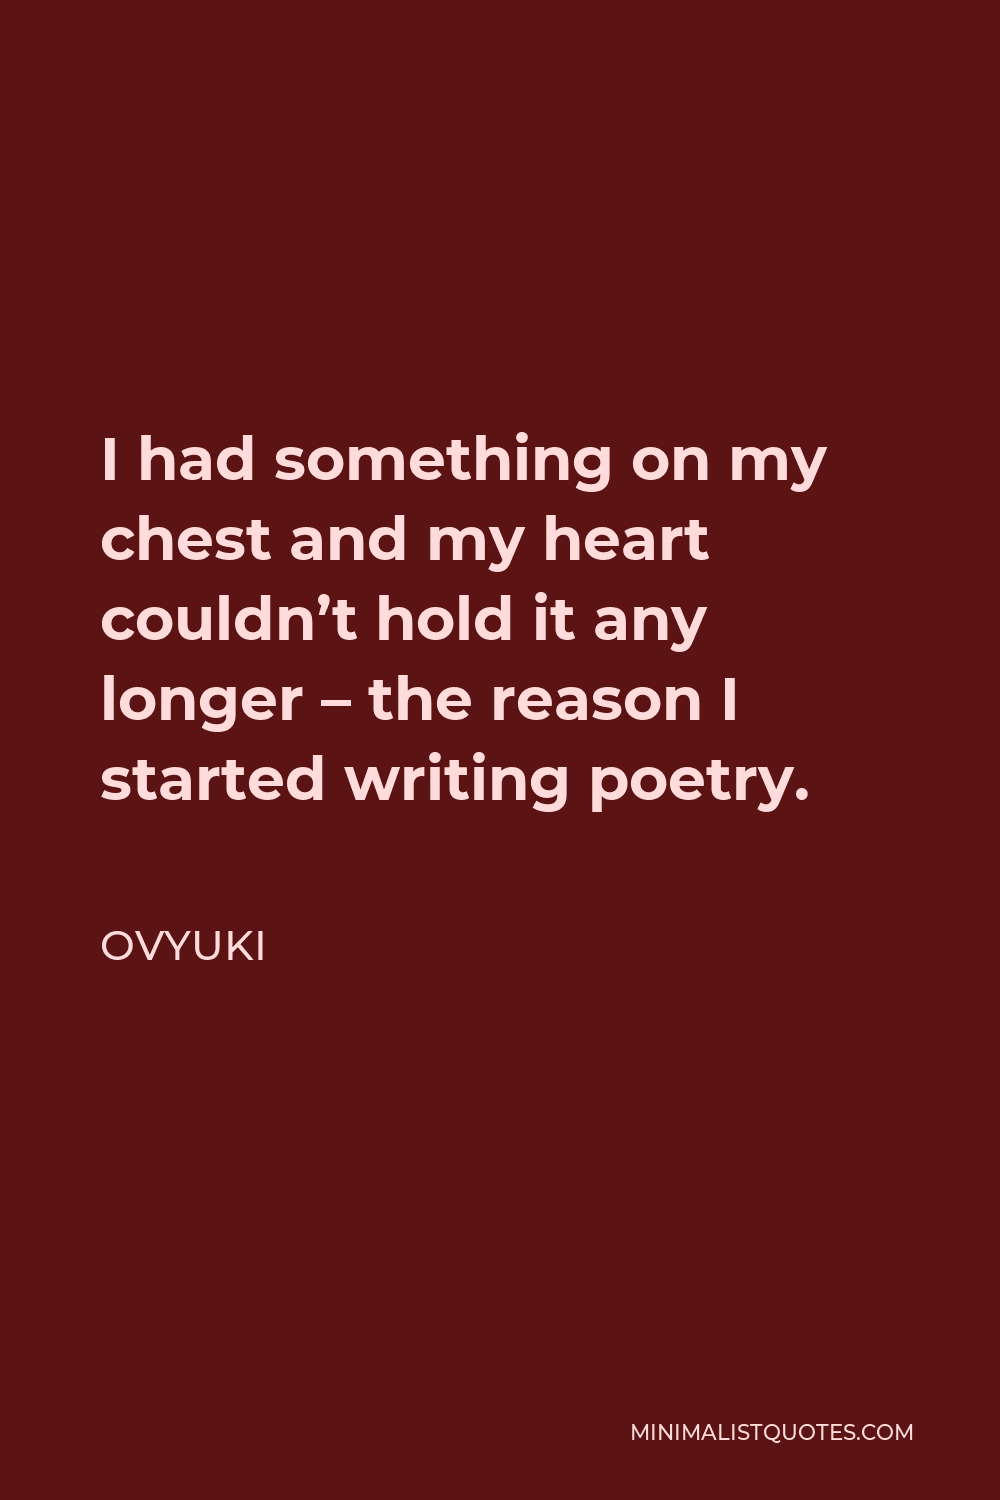 Ovyuki Quote - I had something on my chest and my heart couldn’t hold it any longer – the reason I started writing poetry.